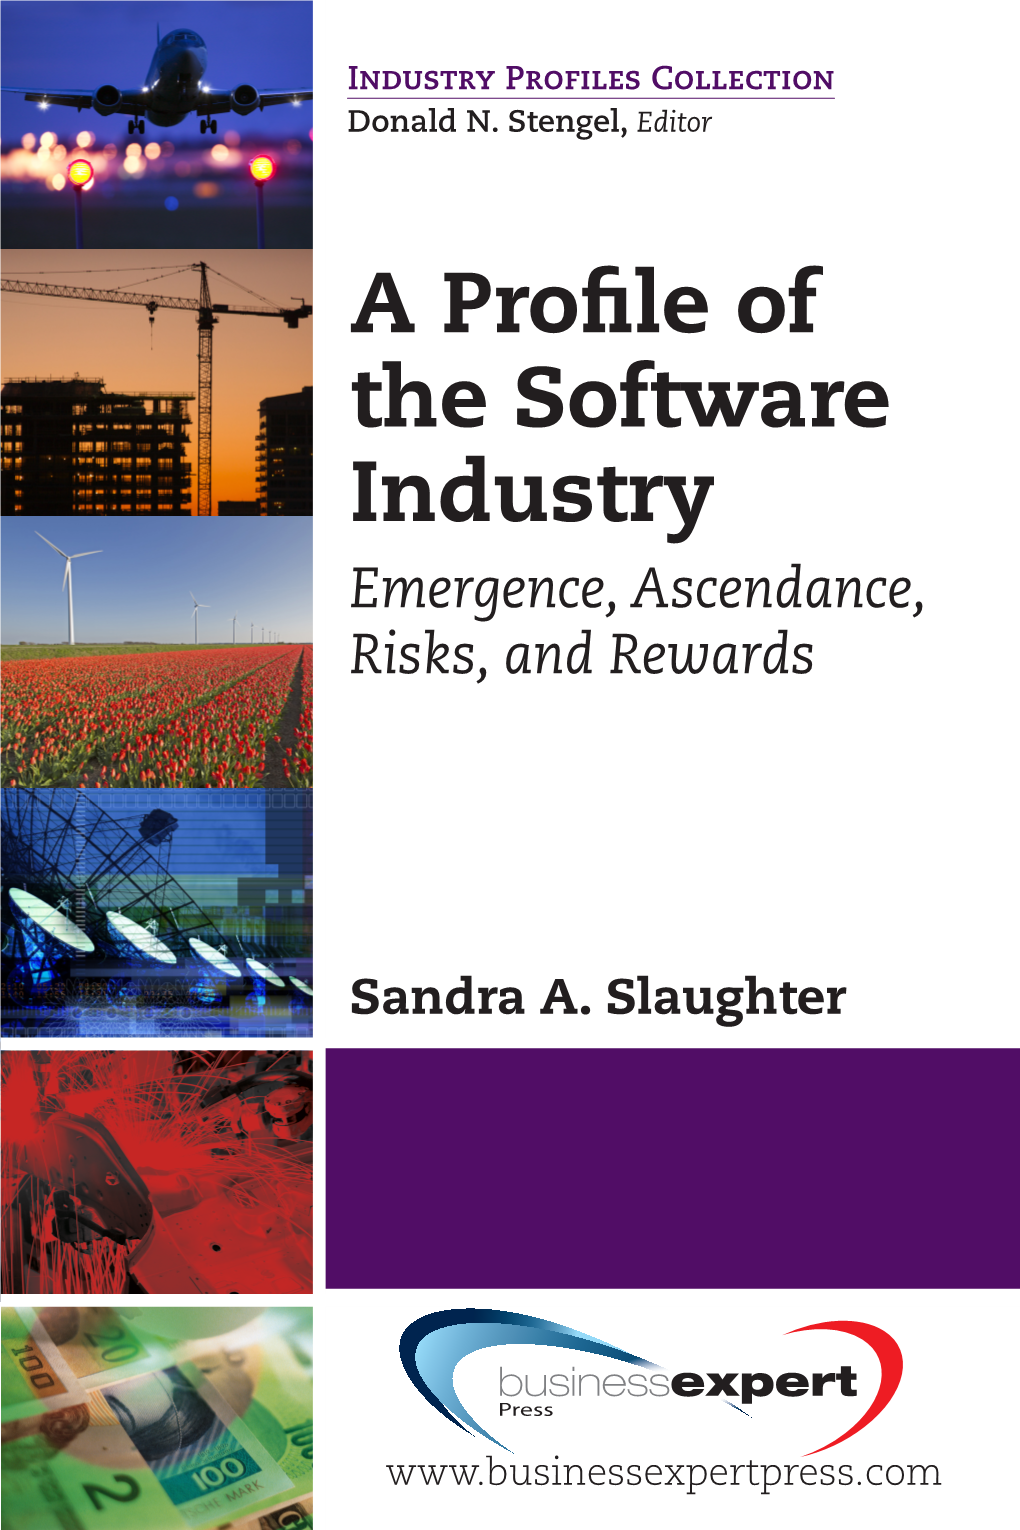 A Profile of the Software Industry: Emergence, Ascendance, Risks, and Rewards Copyright © Business Expert Press, LLC, 2014